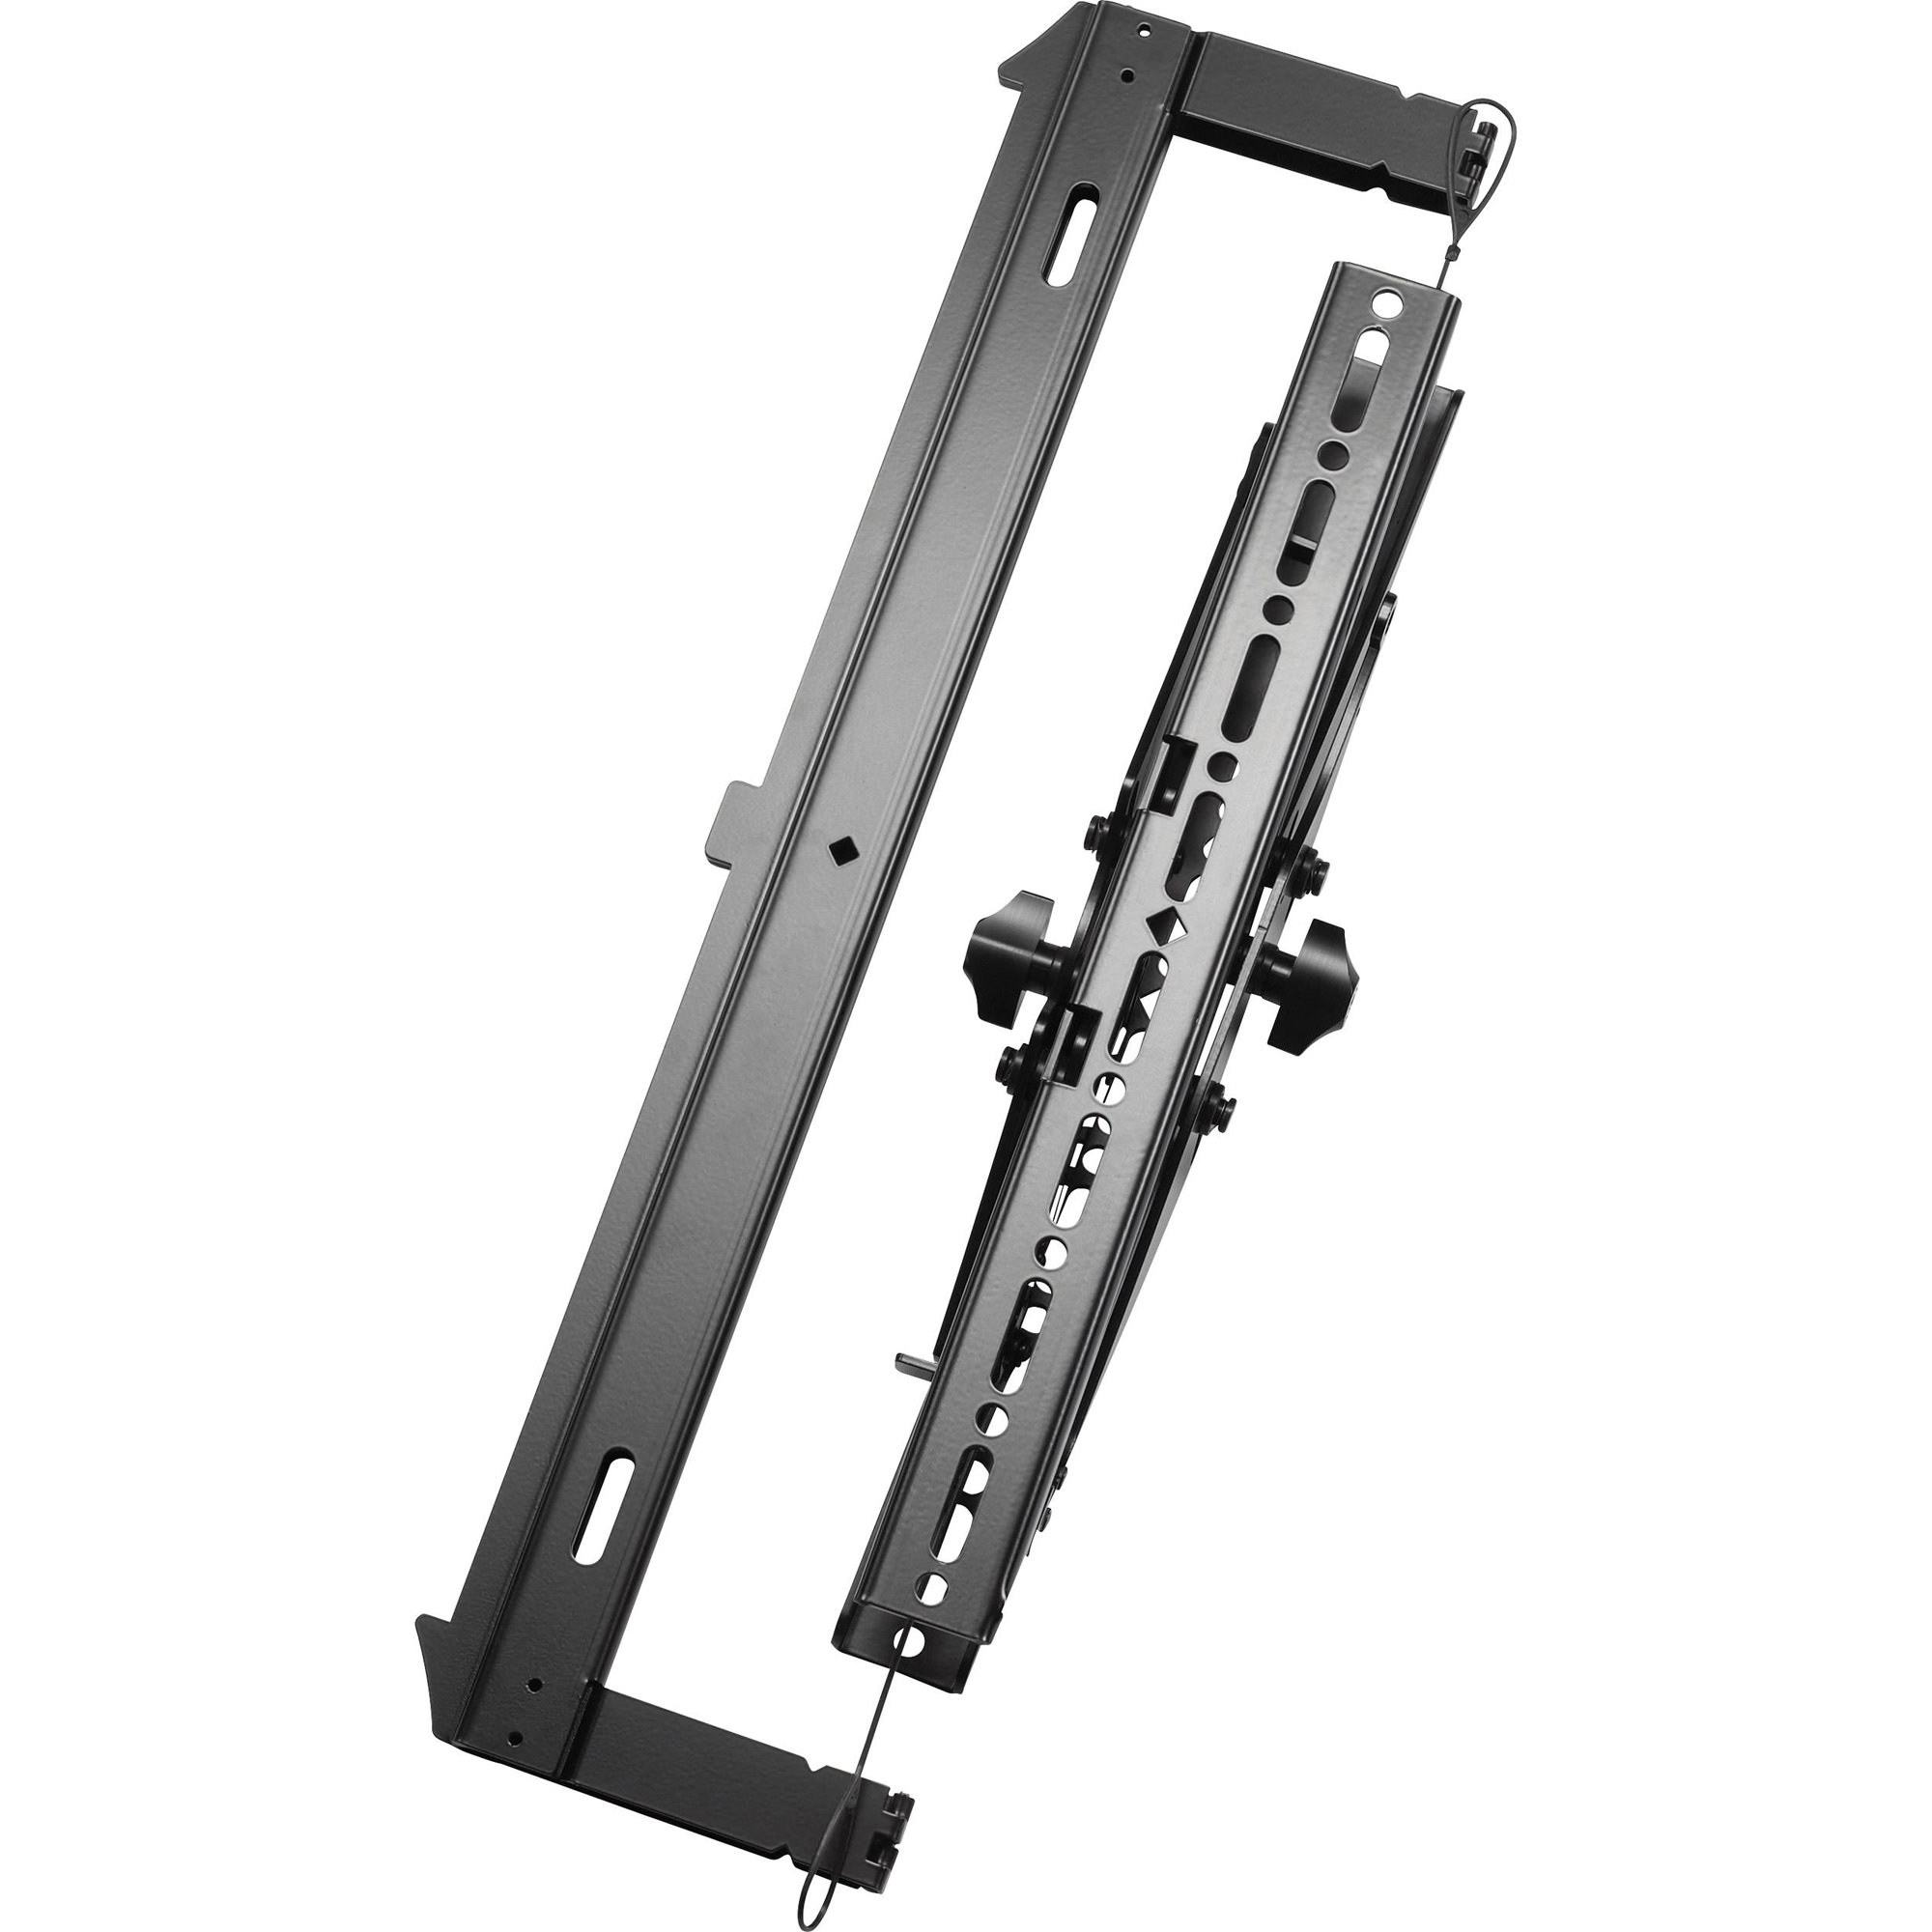 Chief RLT2 Large FIT™ Tilt Wall Mount - image 3 of 4